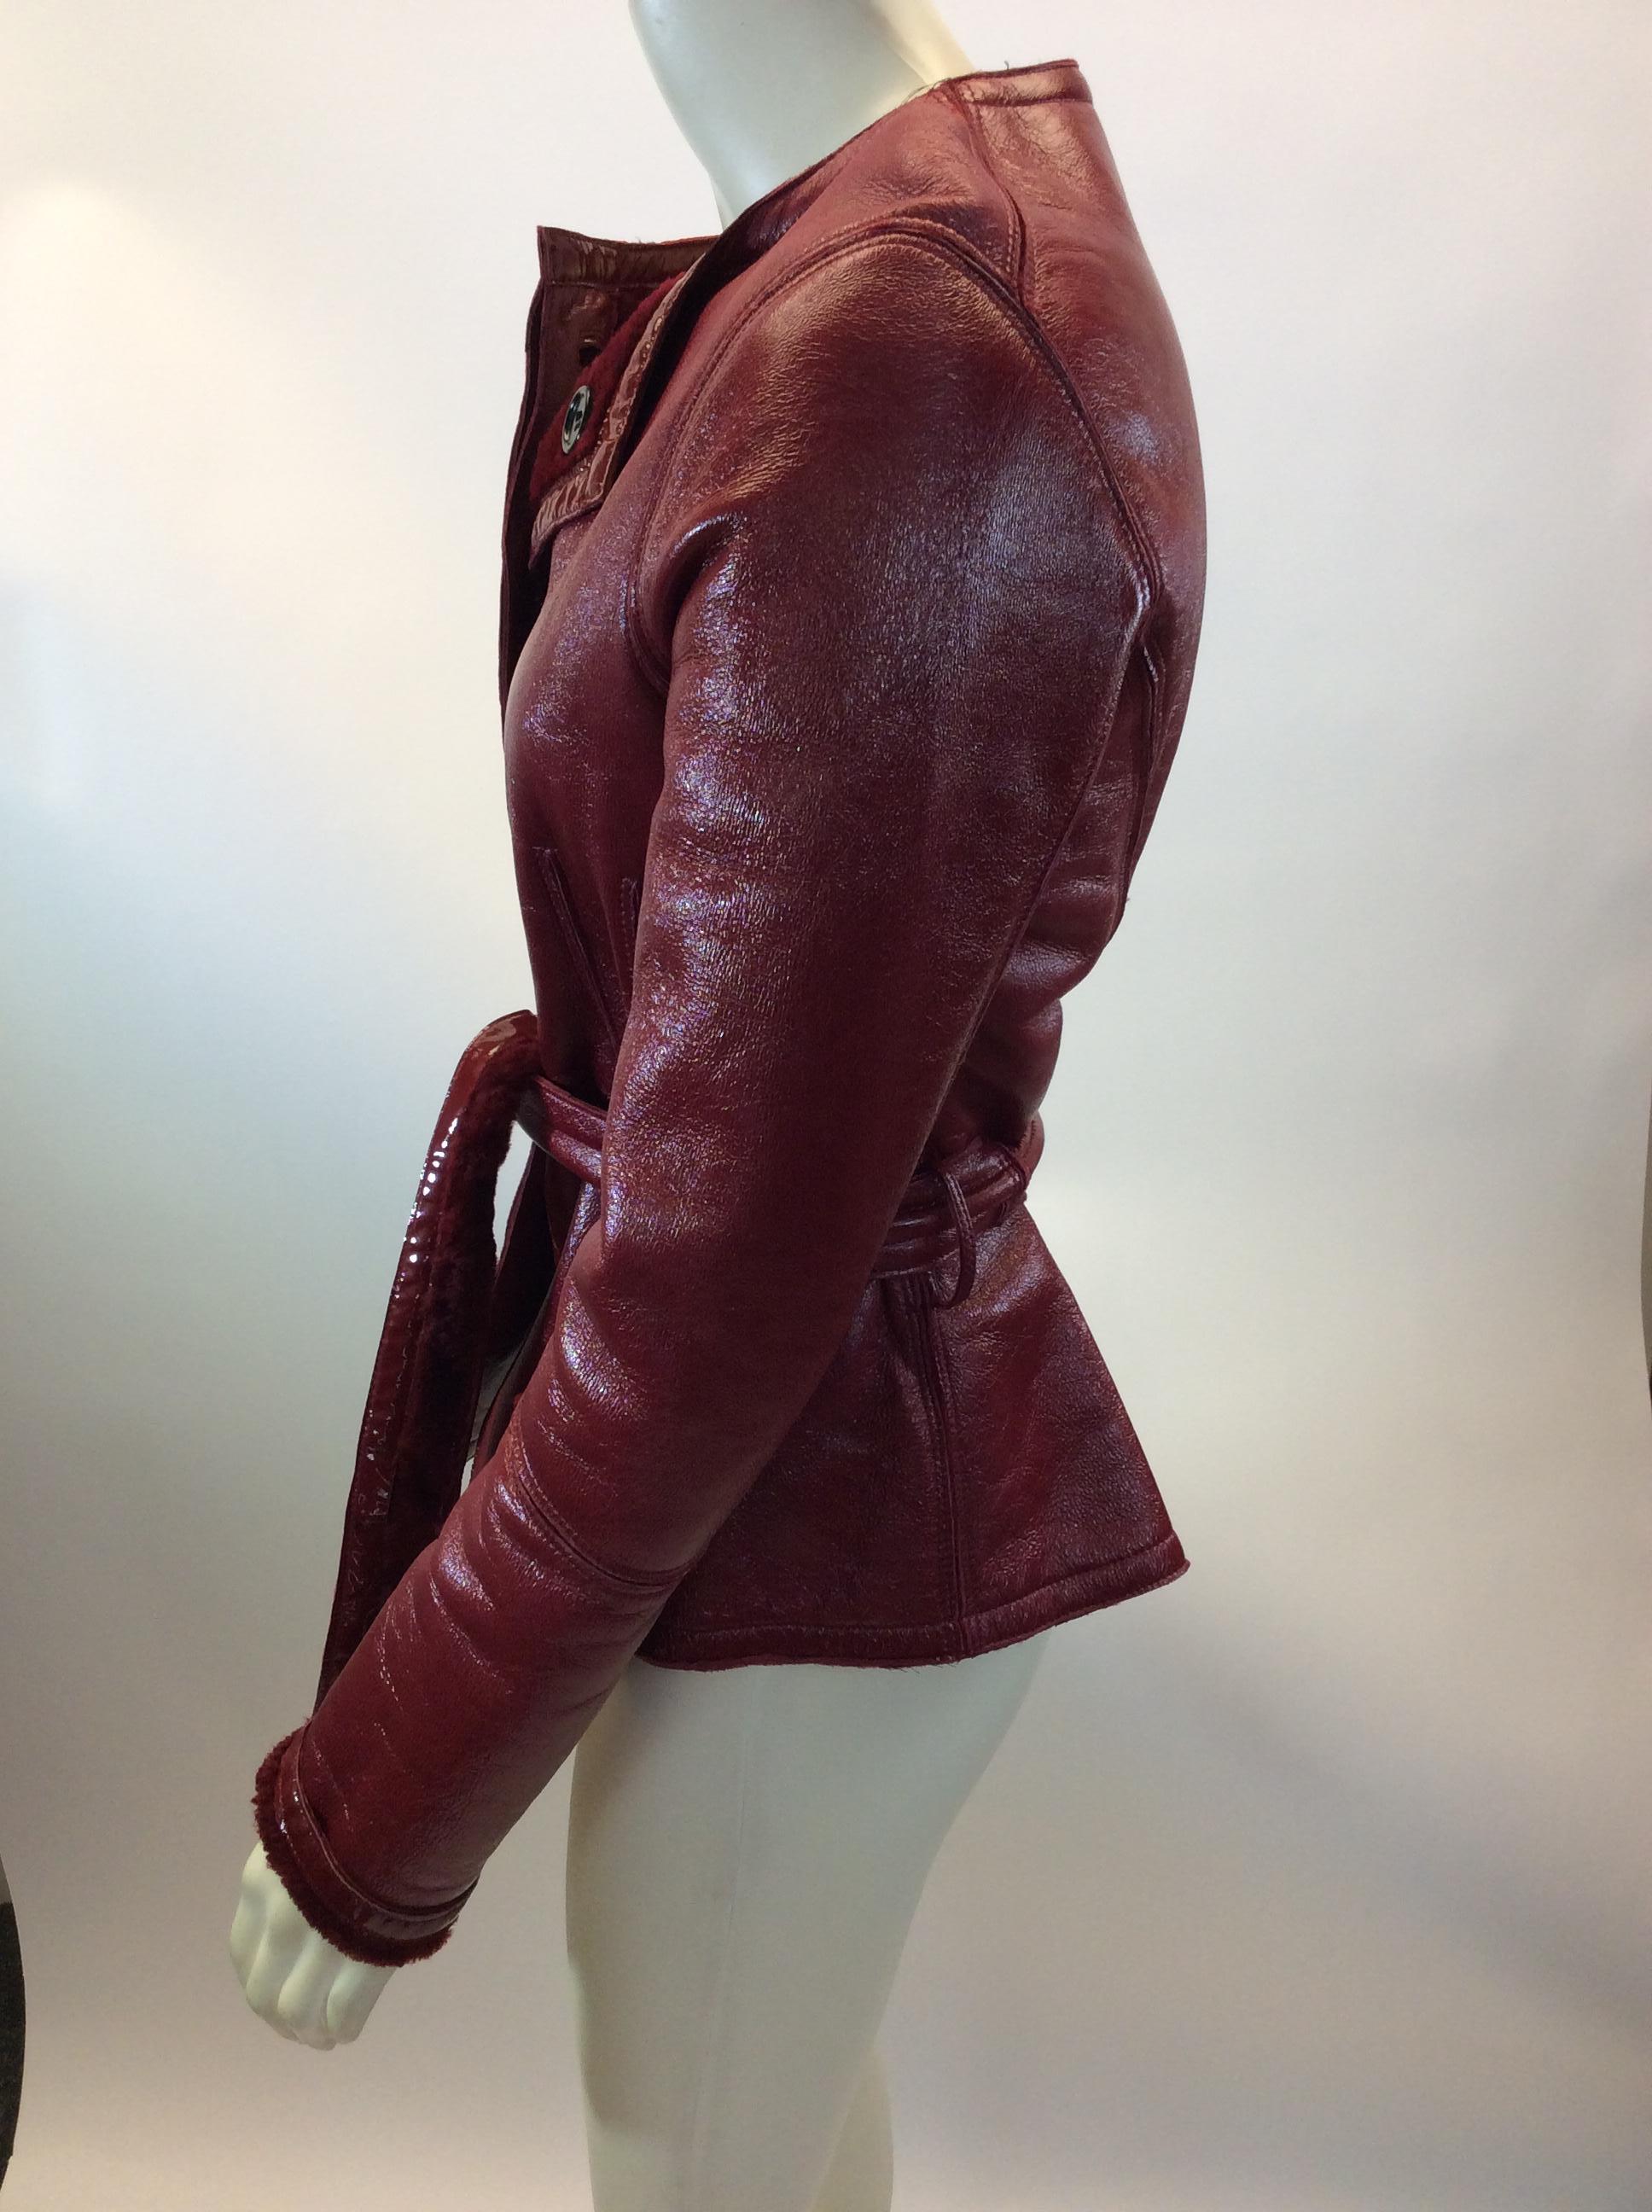 Yves Saint Laurent Red Leather and Shearling Jacket
$599
Made in Italy
Leather
Size 38
Length 23.5